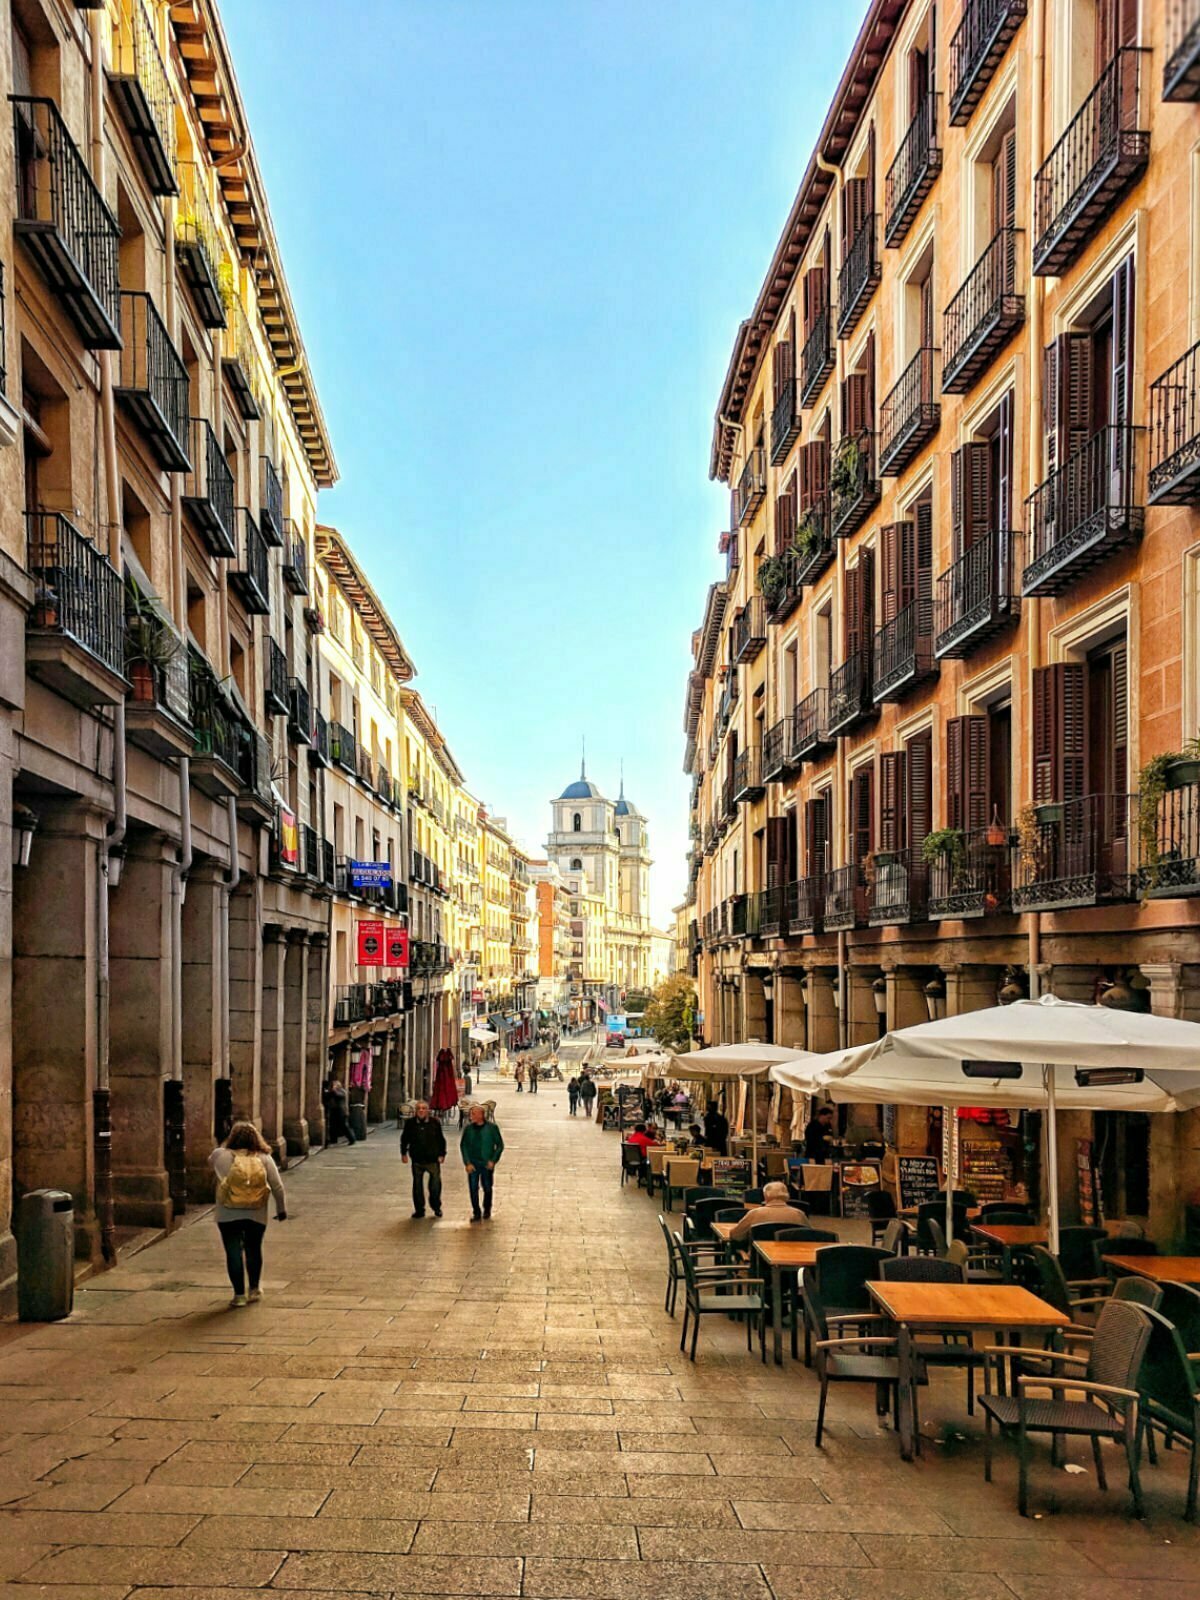 A view down a narrow street leading to Plaza Major in central Madrid.